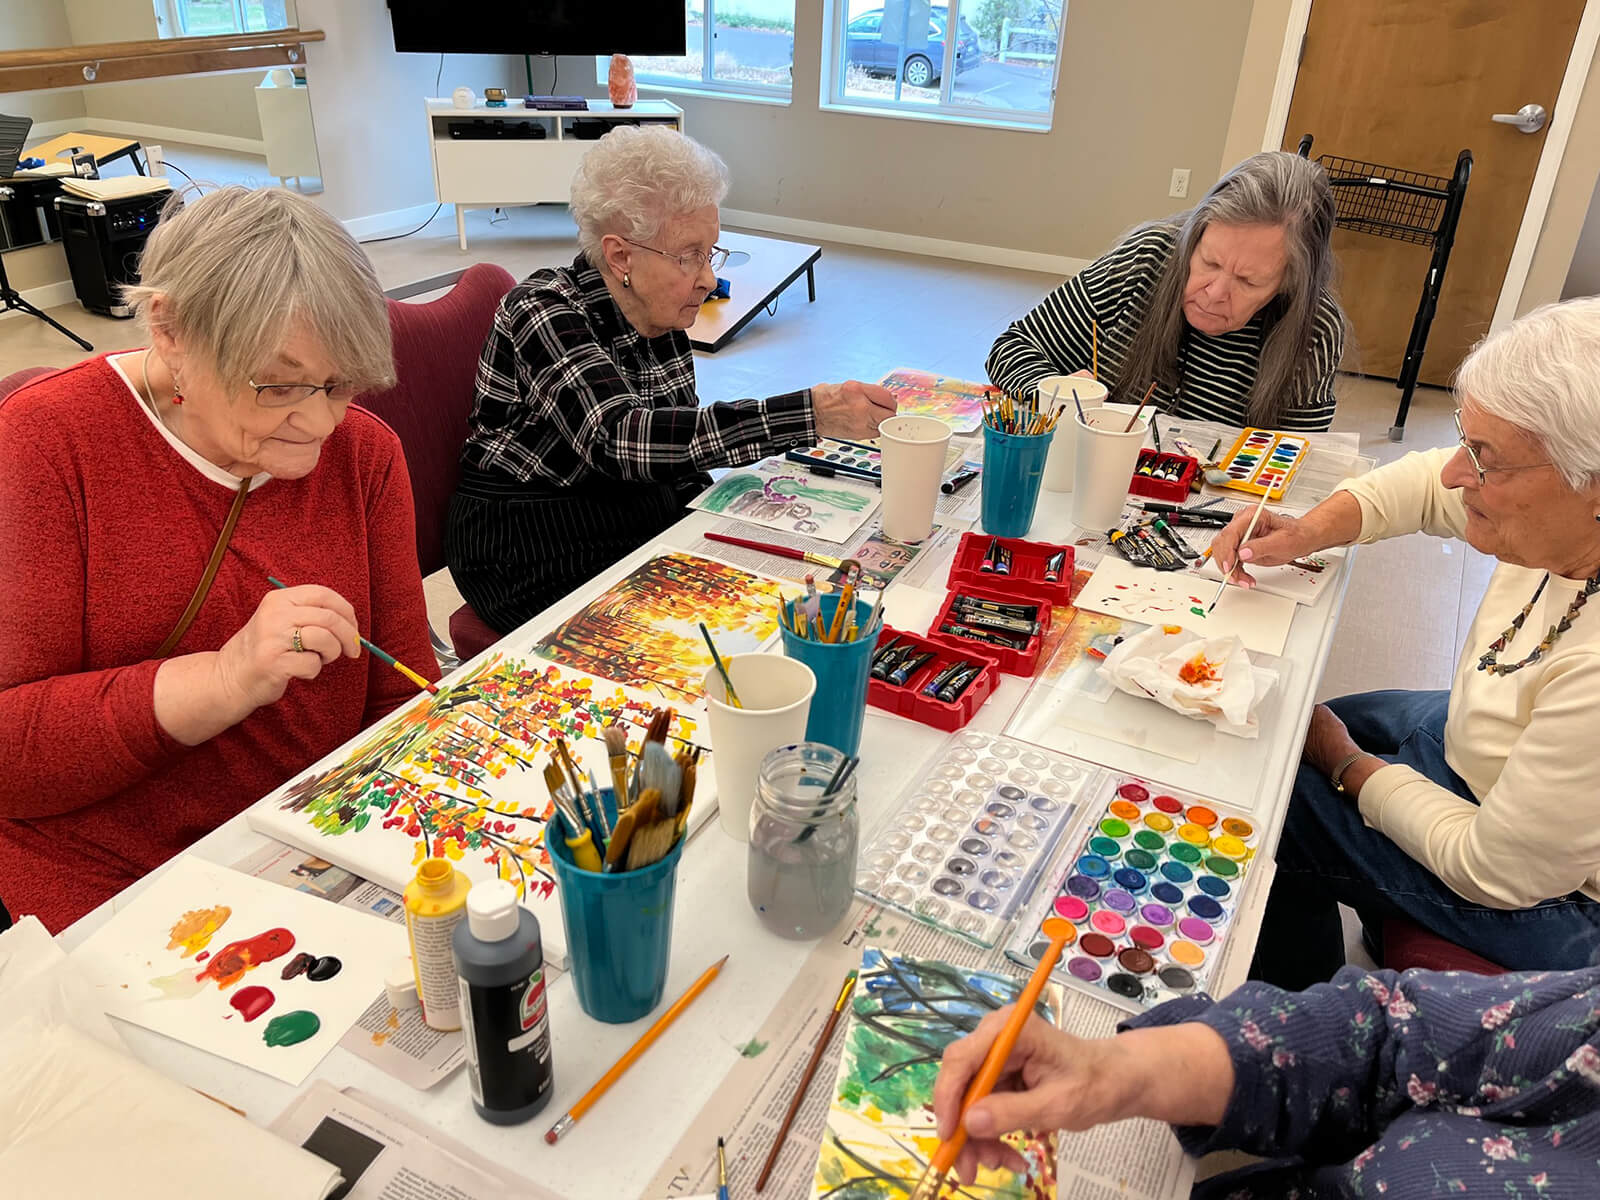 Elderly residents focused on painting during an art class at The Waters on 50th, expressing creativity and artistry.